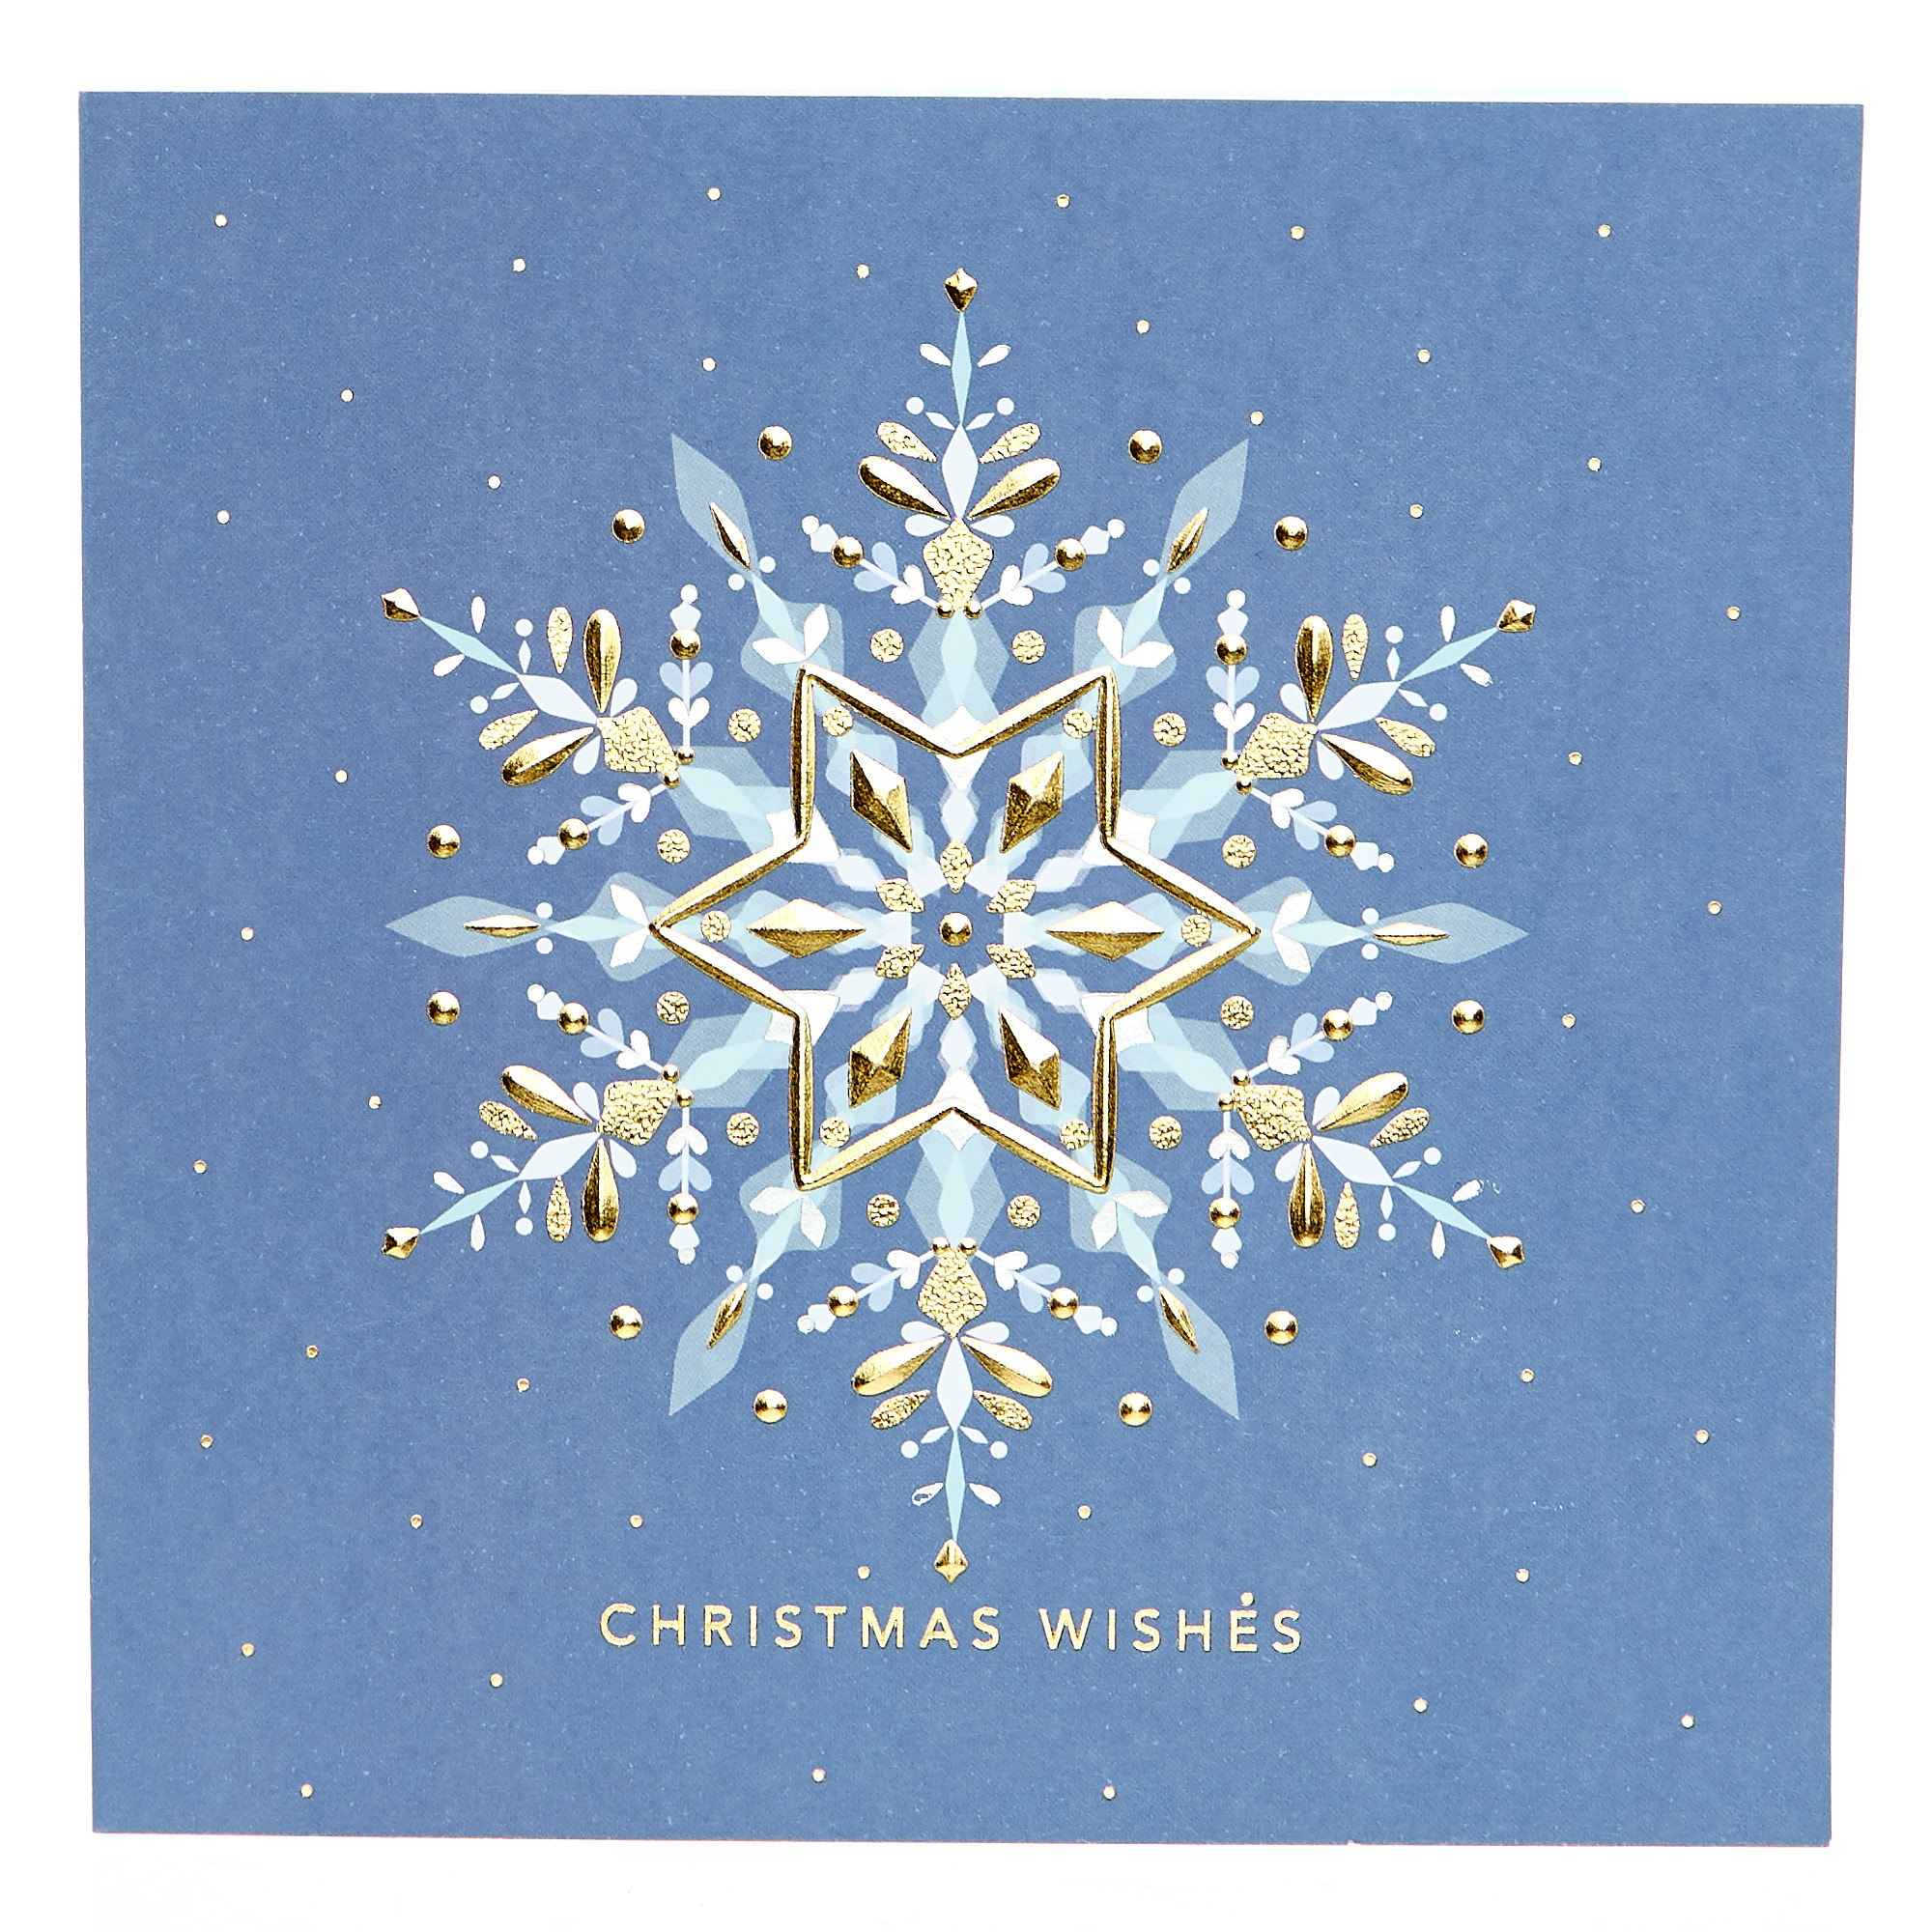 18 Modern Charity Christmas Cards - 2 Designs